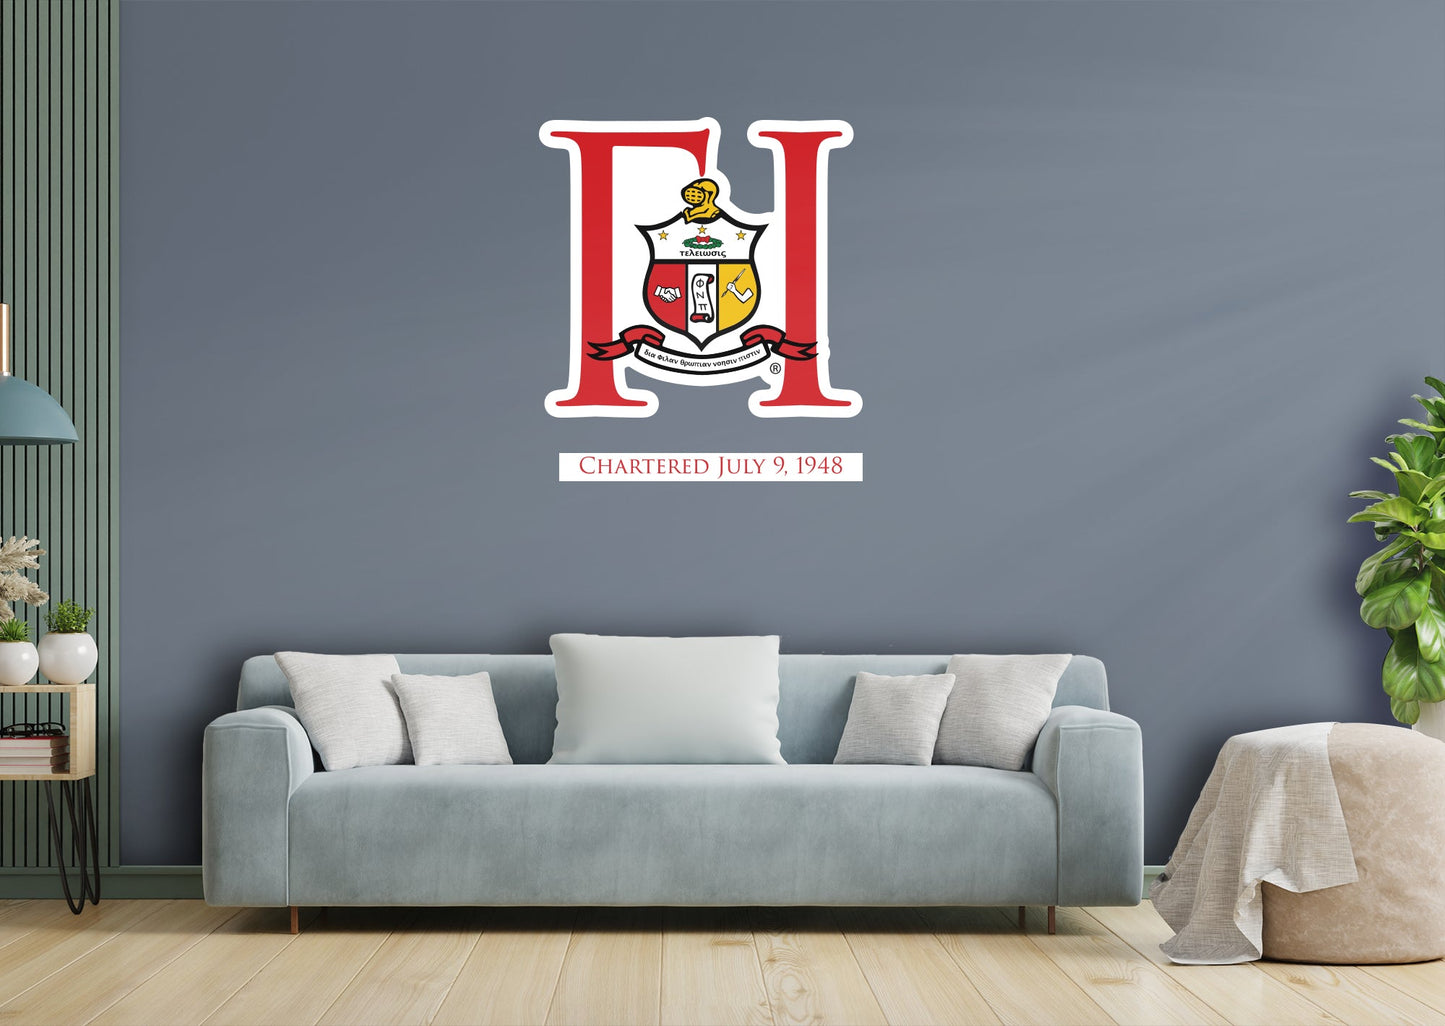 Kappa Alpha Psi: Gamma Kappa Chapter Date RealBig - Officially Licensed Fraternity Removable Adhesive Decal